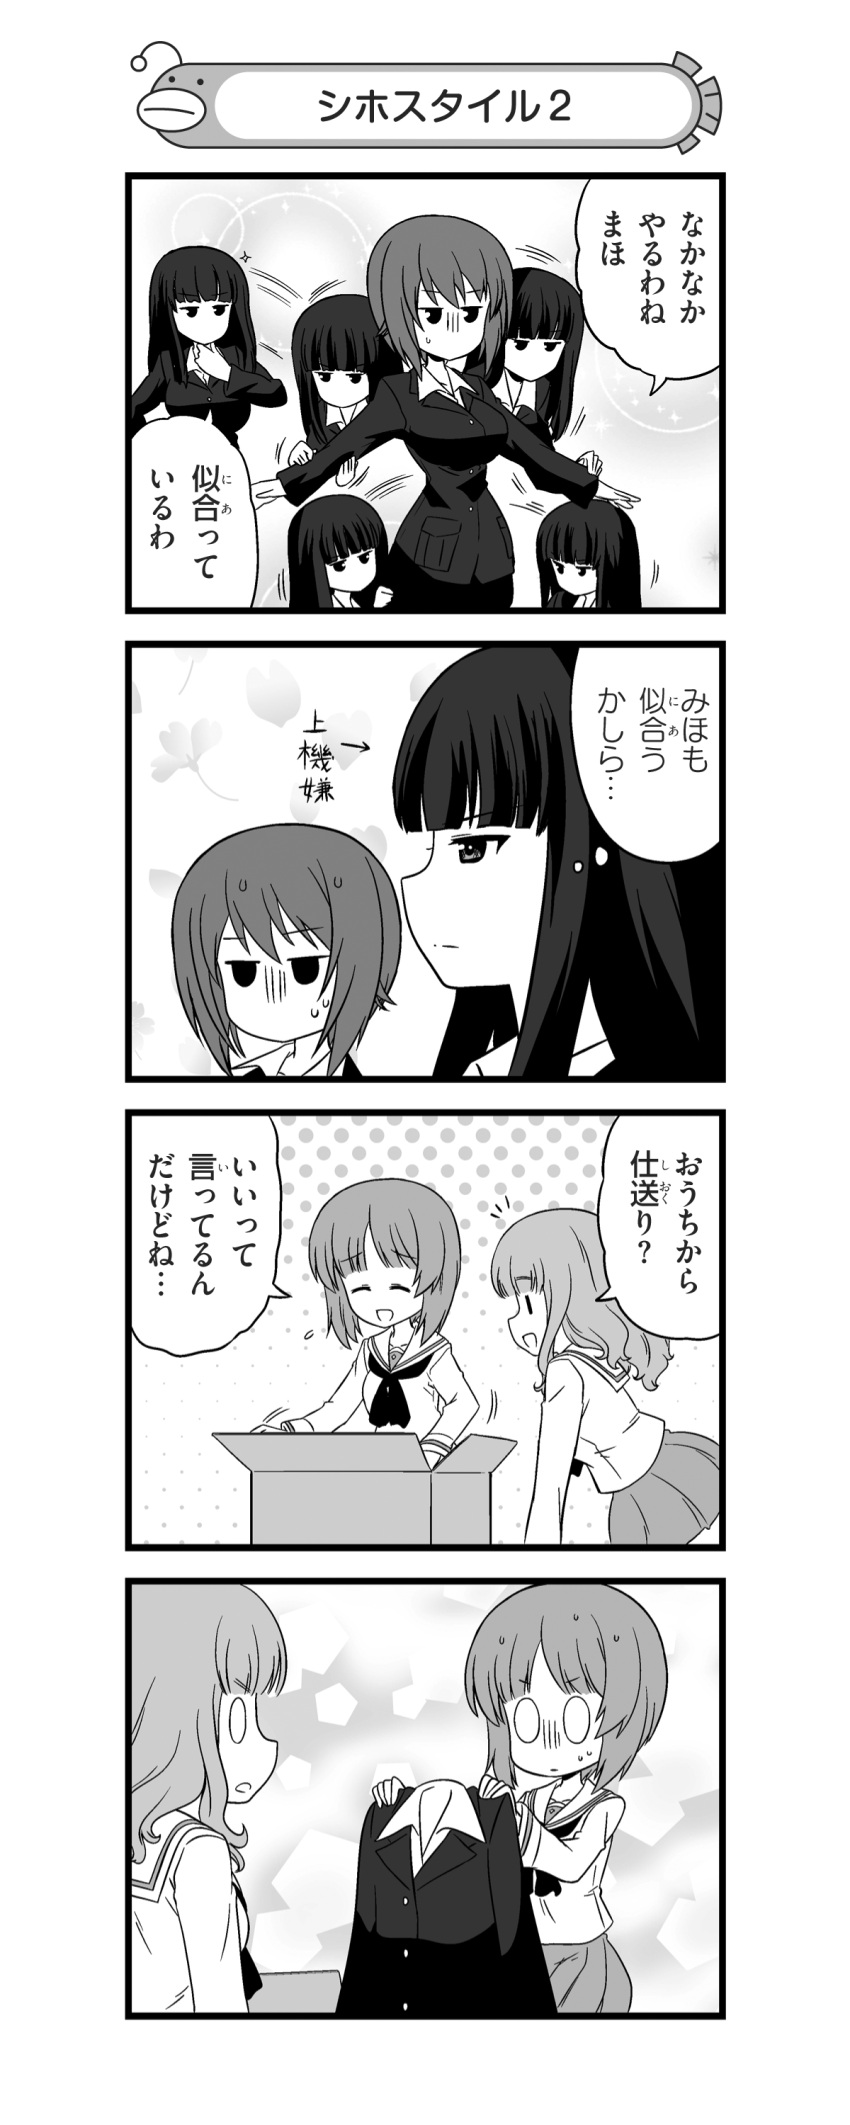 0_0 4girls 4koma absurdres alternate_costume bangs blank_eyes blouse blunt_bangs closed_eyes comic dress_shirt eyebrows_visible_through_hair formal girls_und_panzer gloom_(expression) greyscale highres holding_clothes jacket jitome long_hair long_sleeves miniskirt monochrome mother_and_daughter multiple_girls nanashiro_gorou neckerchief nishizumi_maho nishizumi_miho nishizumi_shiho no_mouth official_art ooarai_school_uniform open_mouth pant_suit pants pdf_available pleated_skirt school_uniform serafuku shirt short_hair skirt smile sparkle suit sweatdrop takebe_saori translated